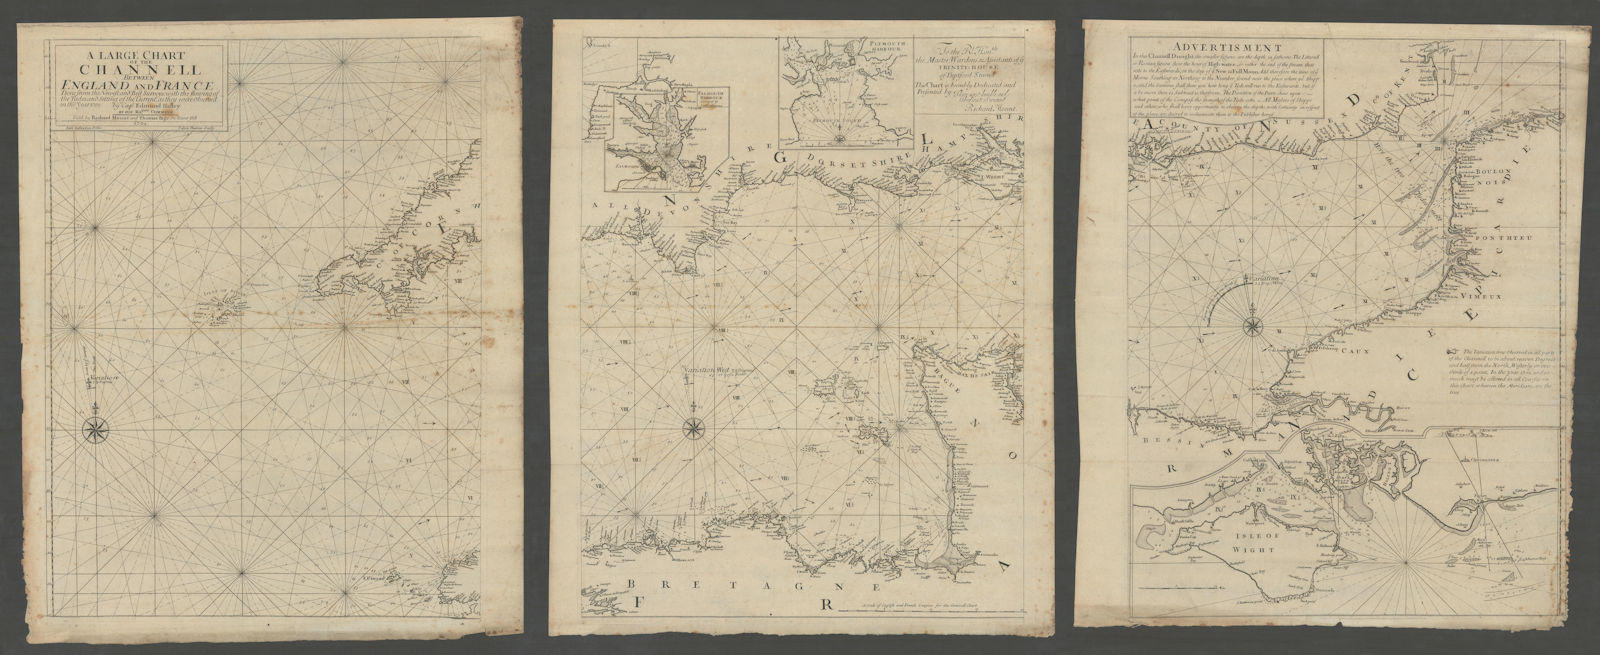 Associate Product A Large Chart of the Channell between England and France. Tides. HALLEY 1702 map